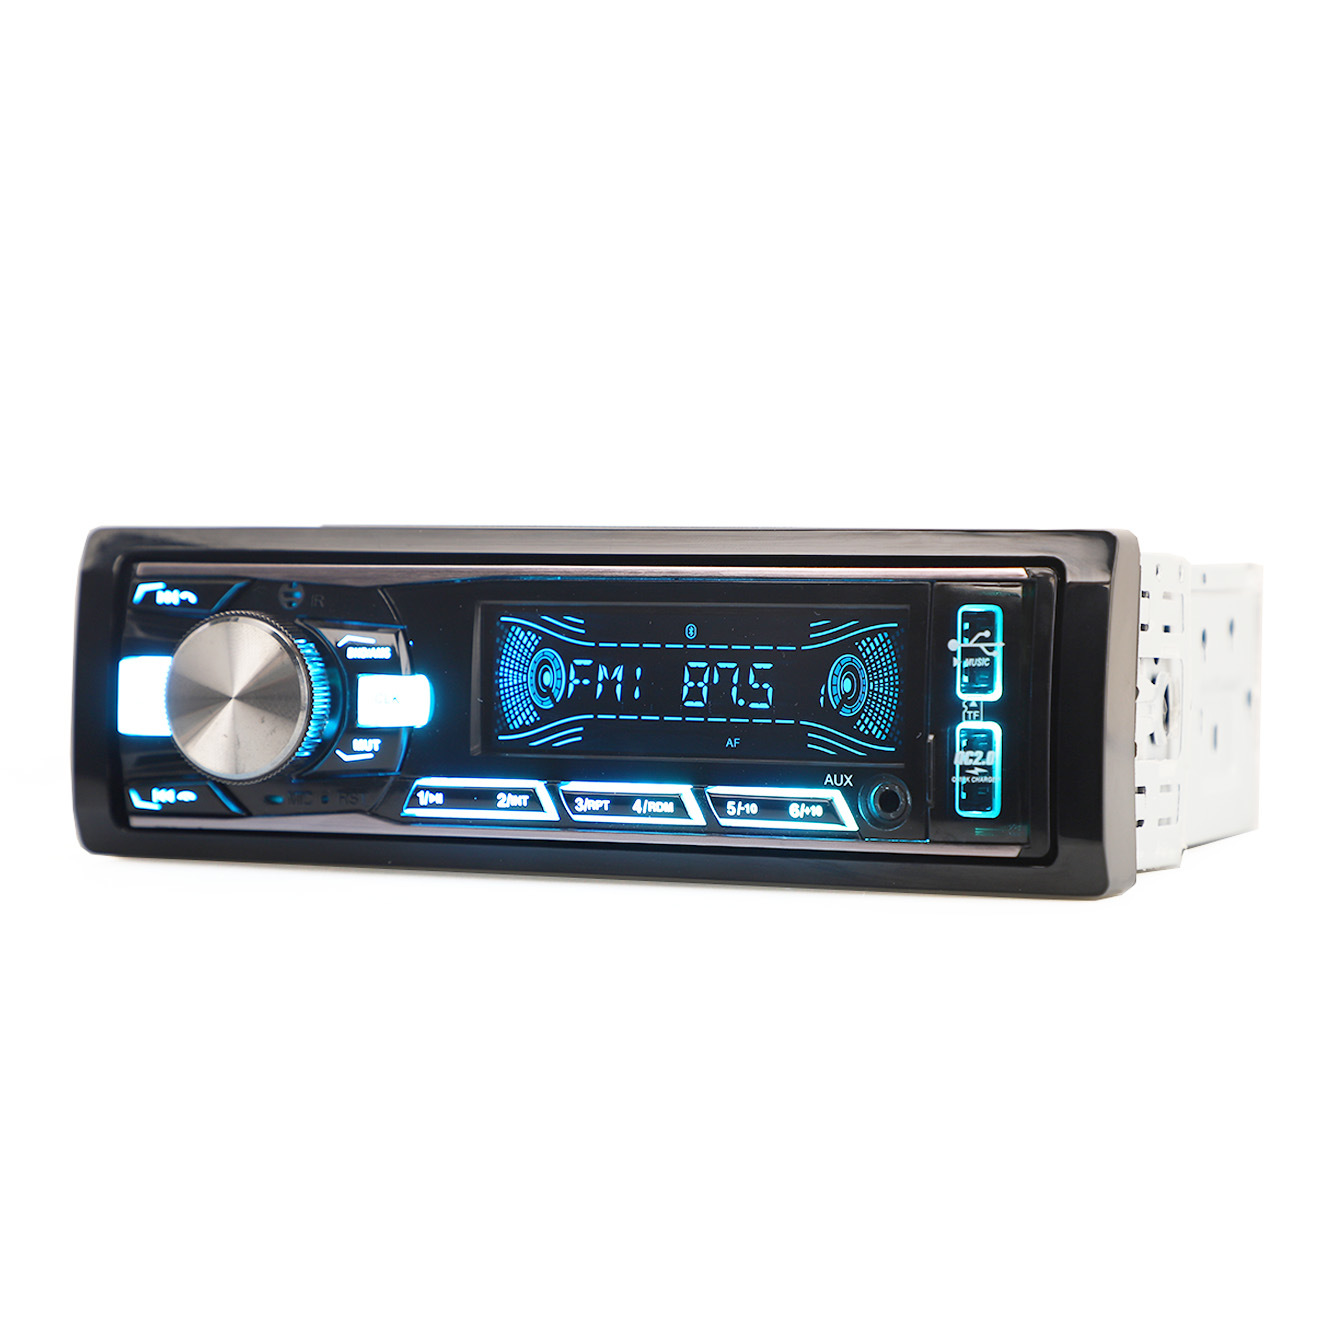 Auto Audio Fixed Panel MP3 Player FM Transmitter Audio Car Stereo Car Audio Car Accessories Single DIN Car Player